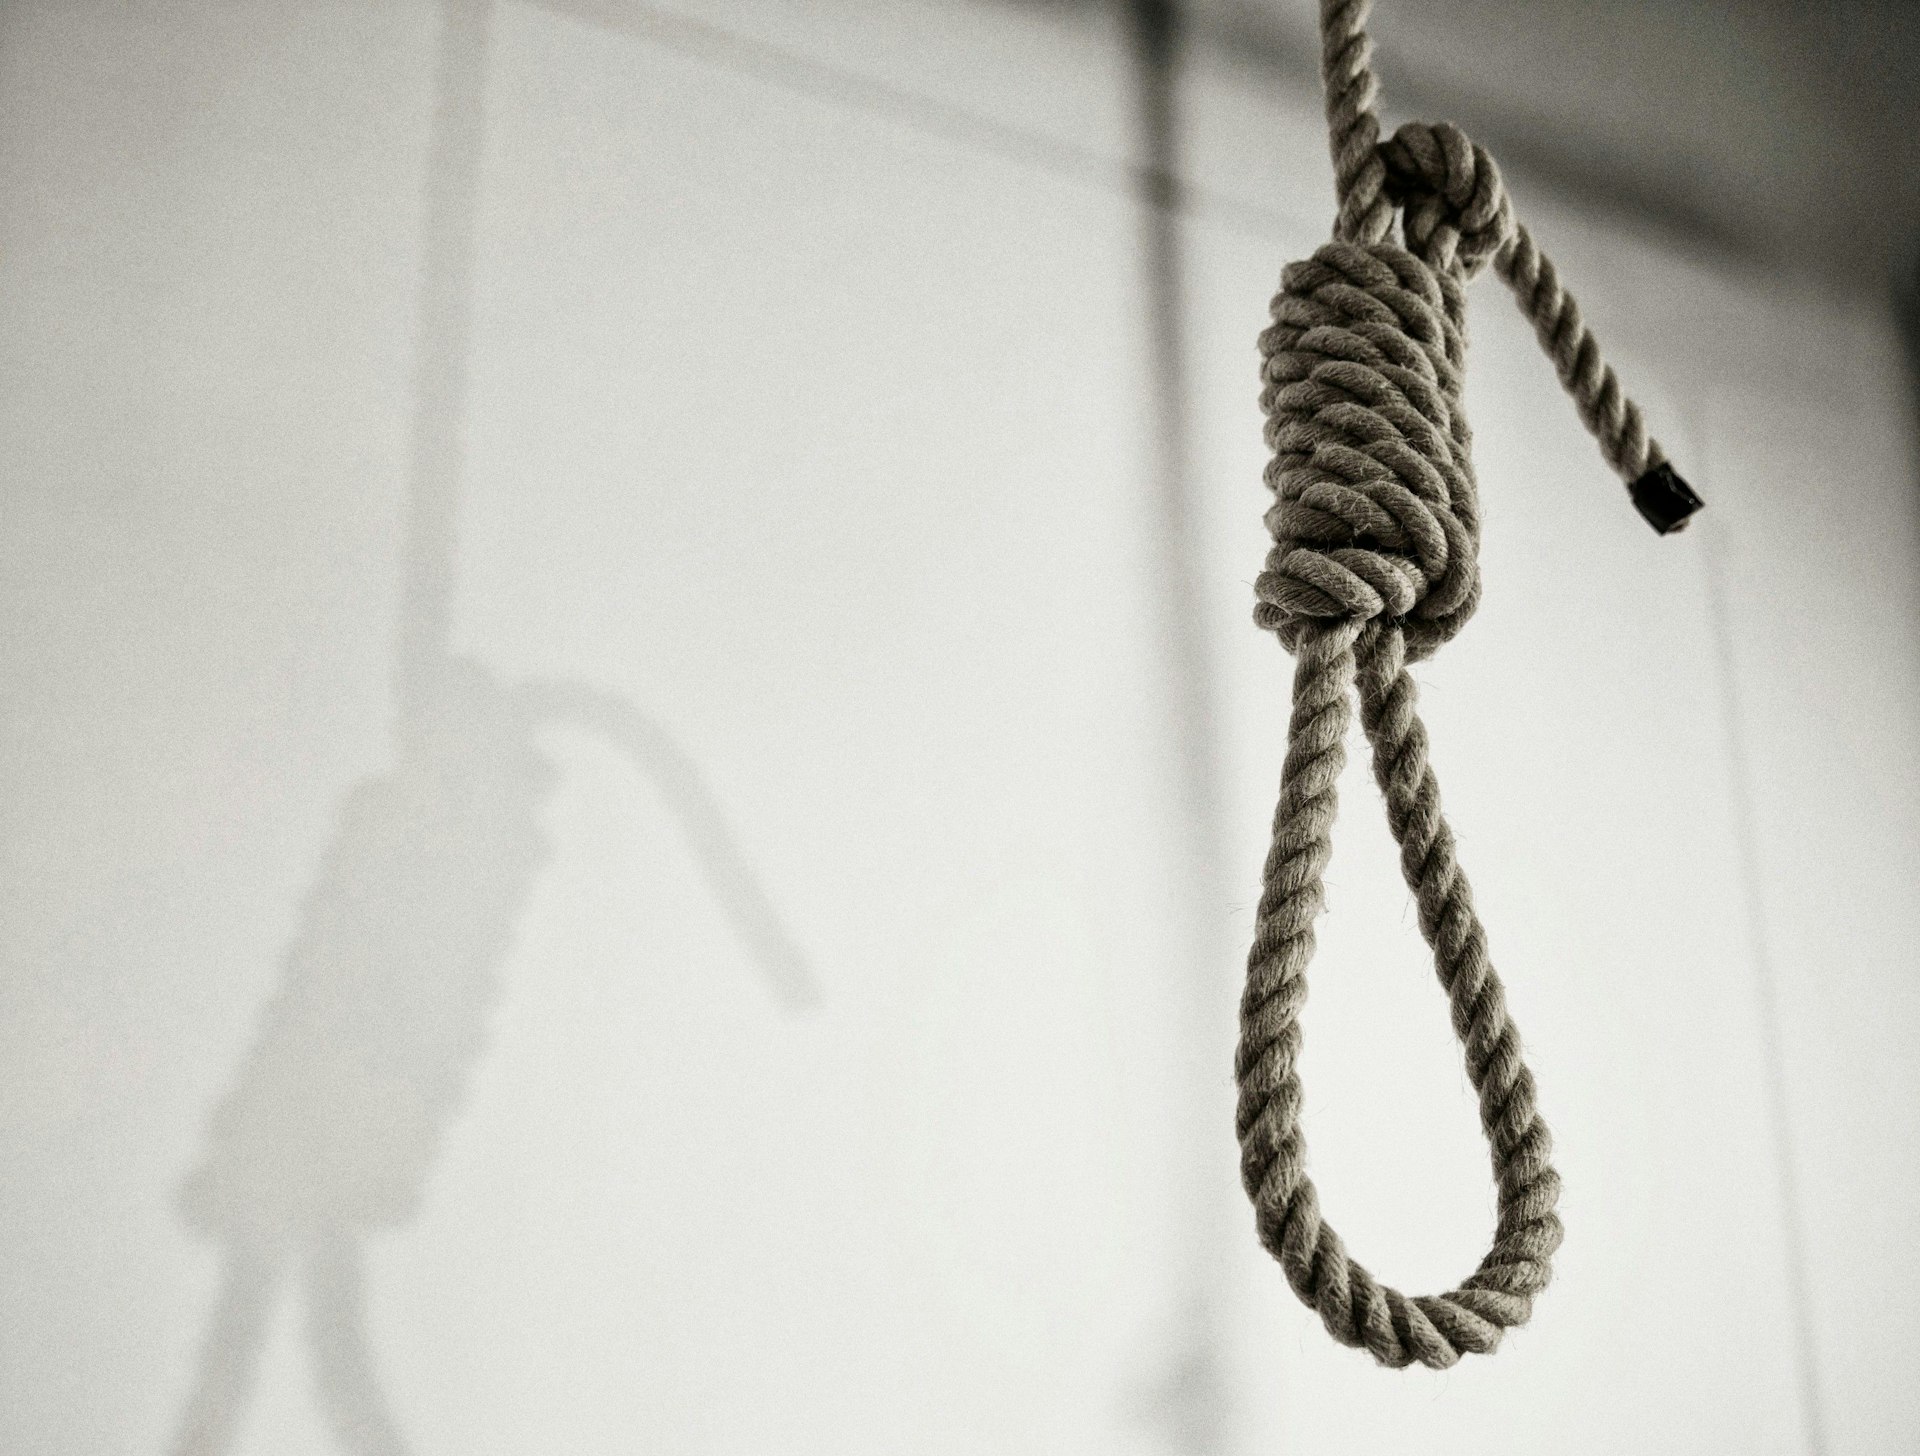 There were more executions in 2015 than there have been for 25 years